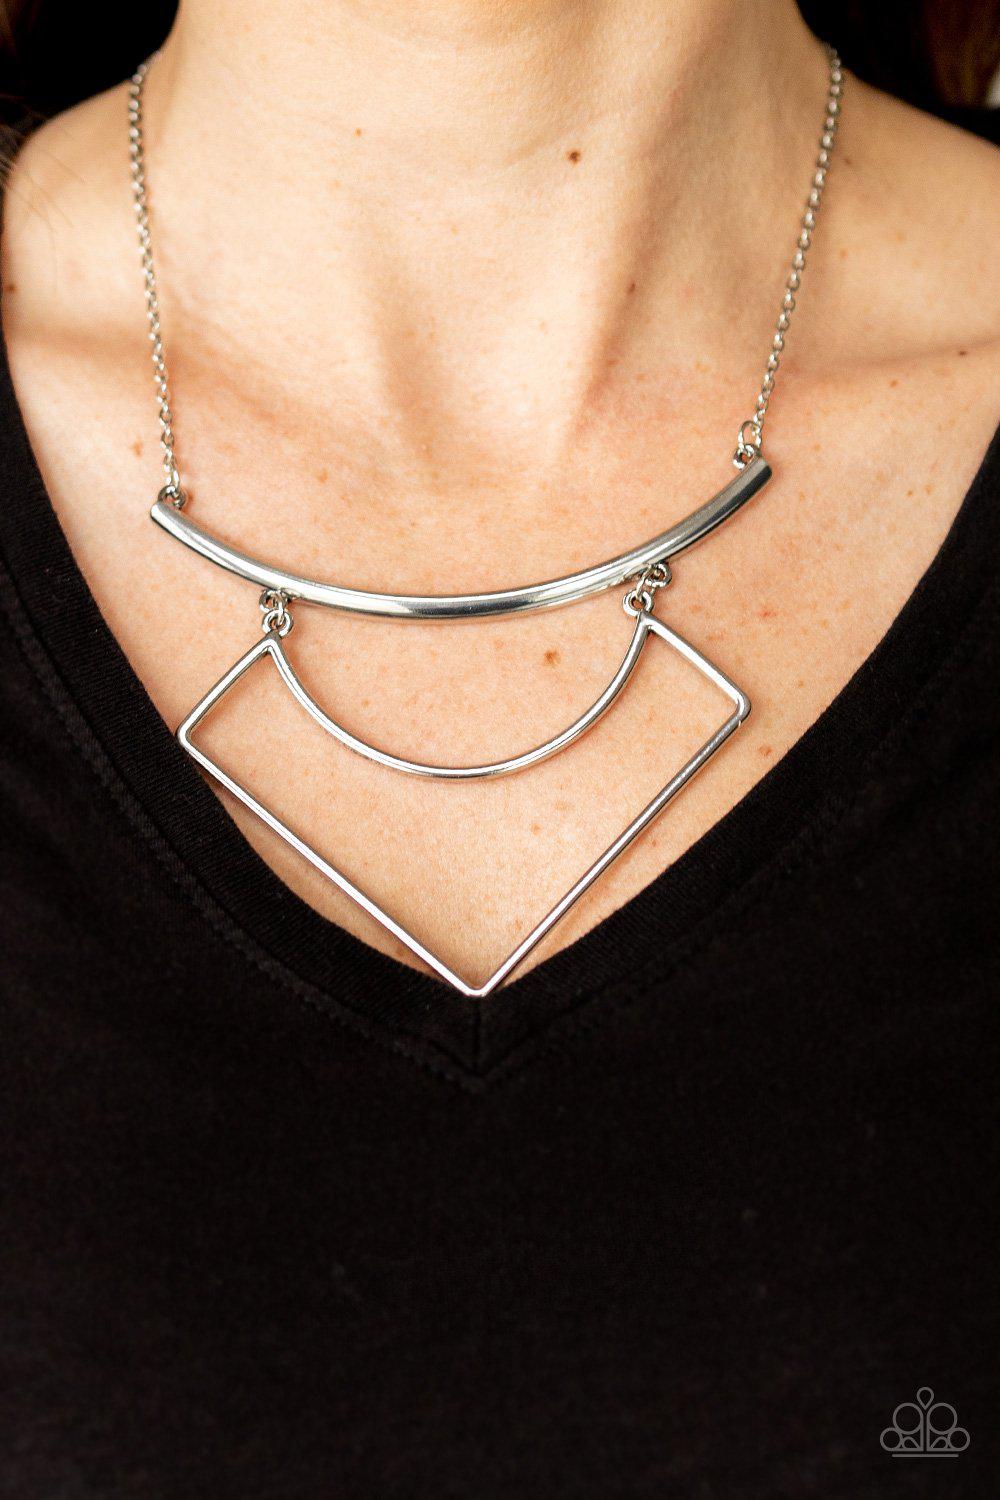 Egyptian Edge Silver Necklace - Paparazzi Accessories - model -CarasShop.com - $5 Jewelry by Cara Jewels